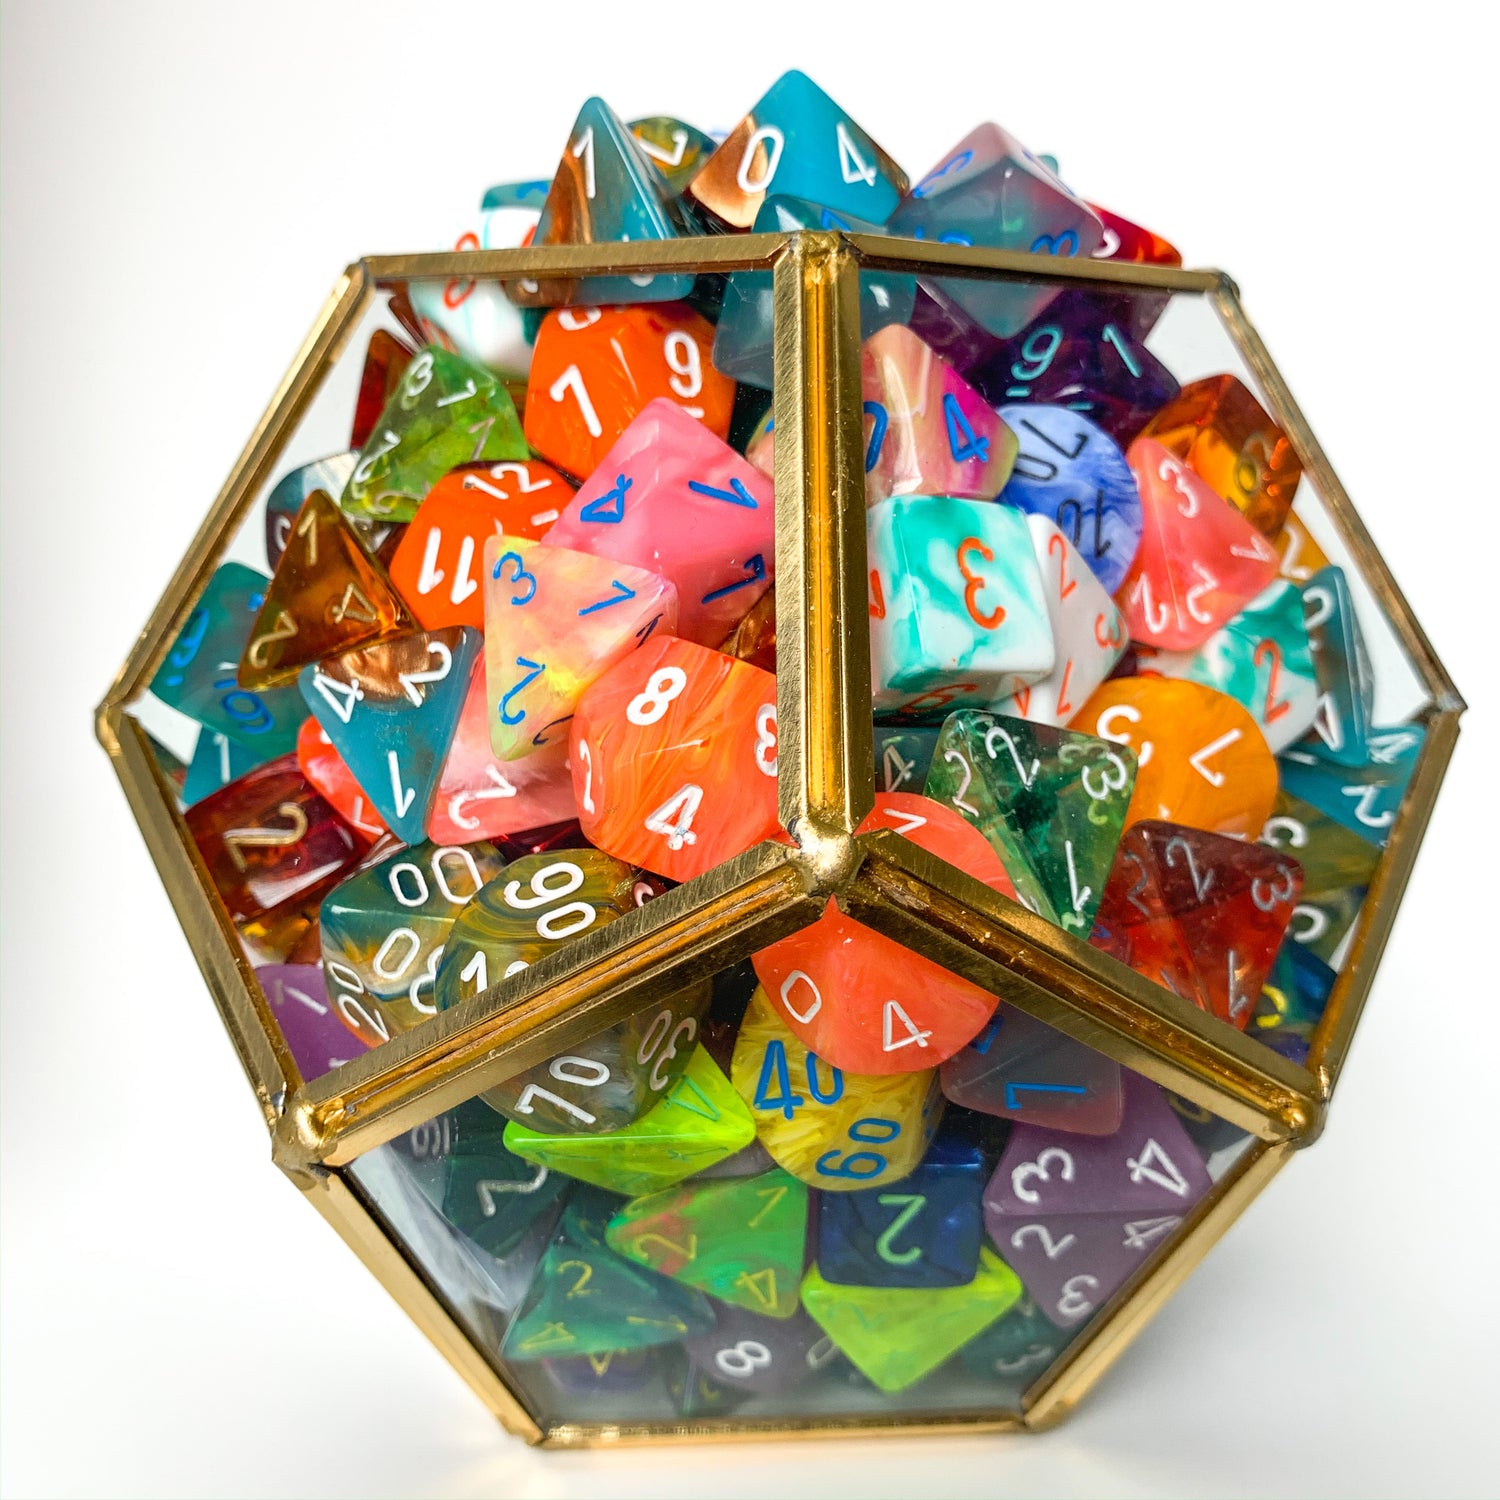 Curated dice